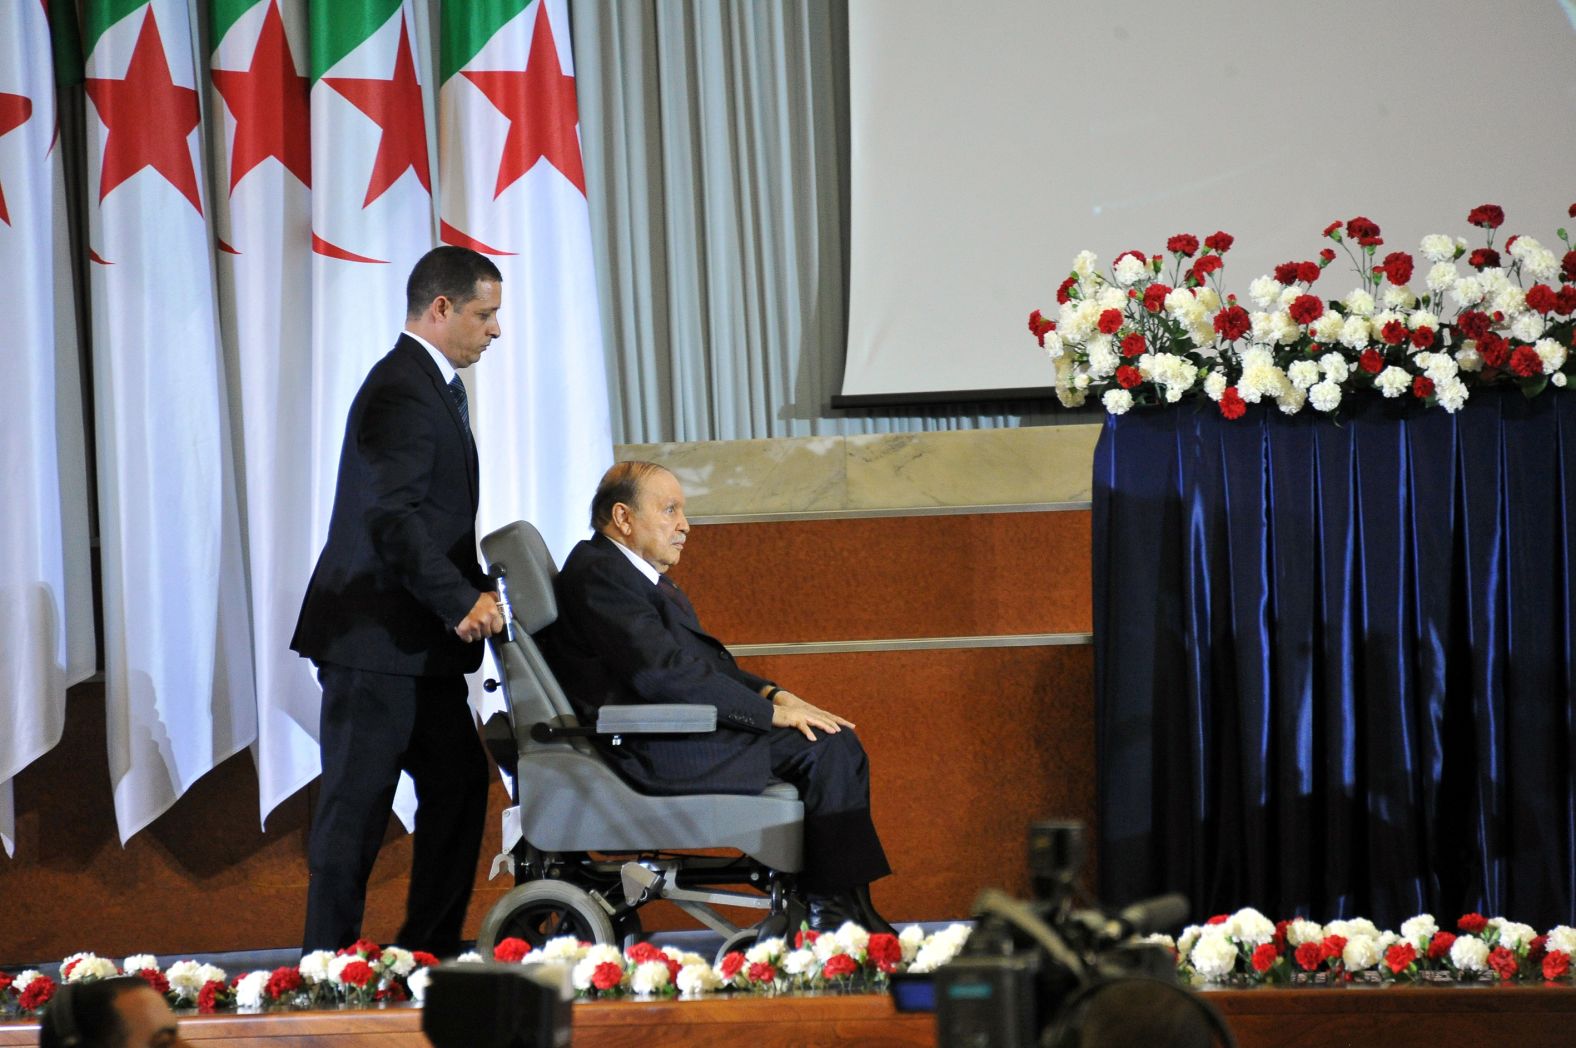 Bouteflika is wheeled across a stage during his swearing-in ceremony in April 2014. Bouteflika has rarely been seen in public since suffering a stroke in 2013.